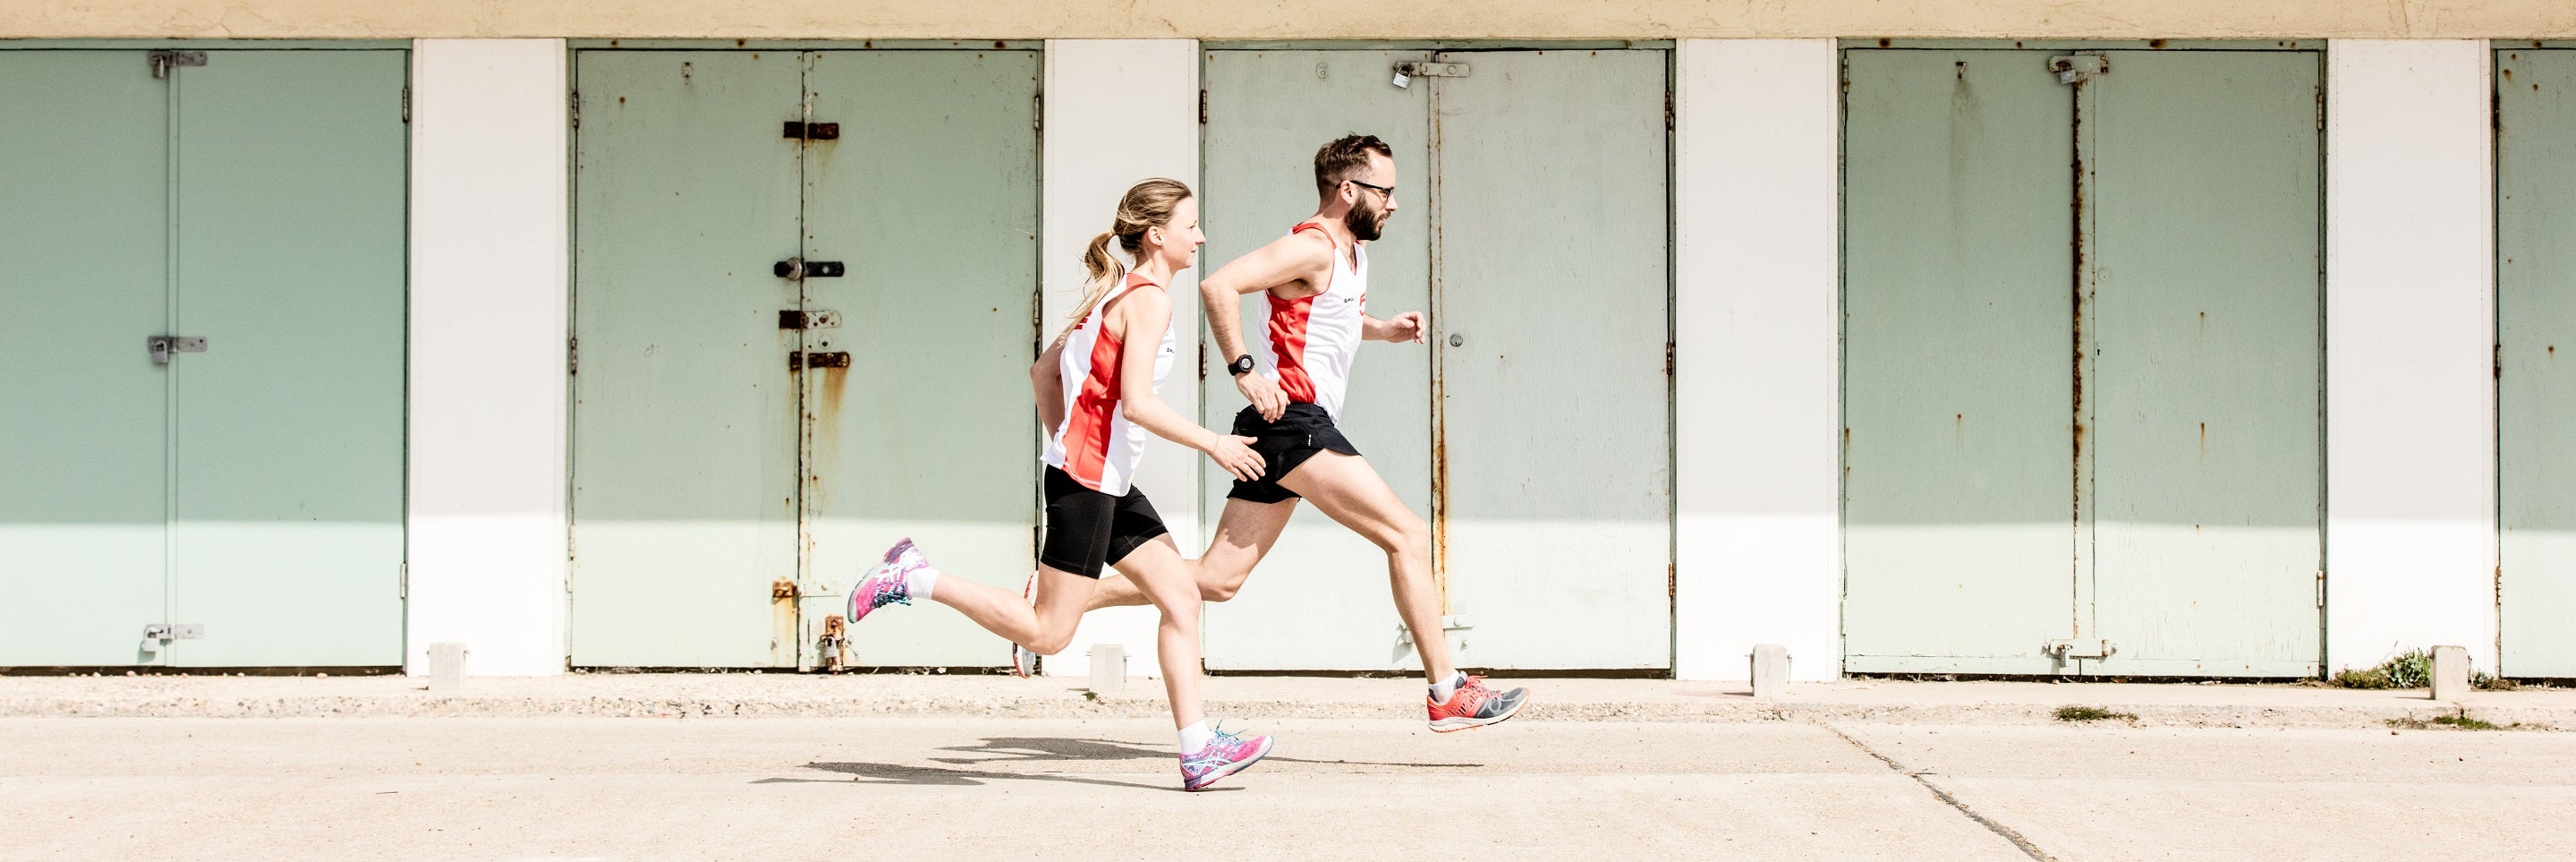 The Major Do's and Don'ts of Running a Marathon